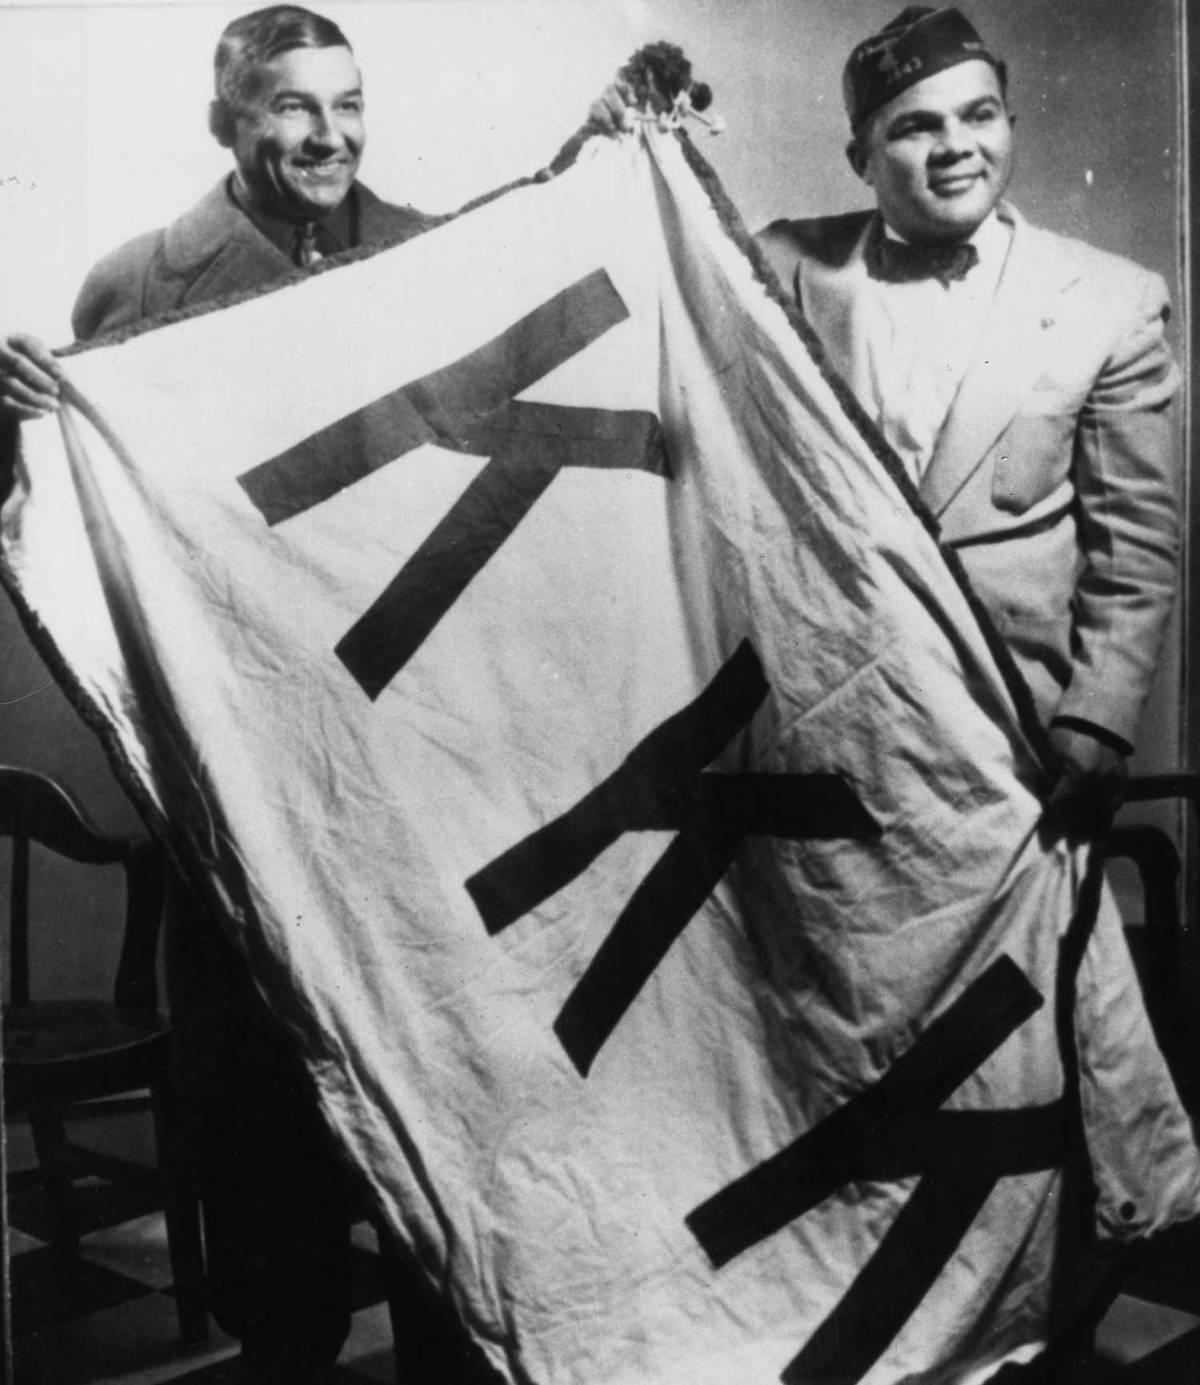 Lumbee members Charlie Warriax and Simeon Oxendine display a captured Ku Klux Klan banner which they confiscated after a raid on a Klan rally in Lumberton, North Carolina, 1958